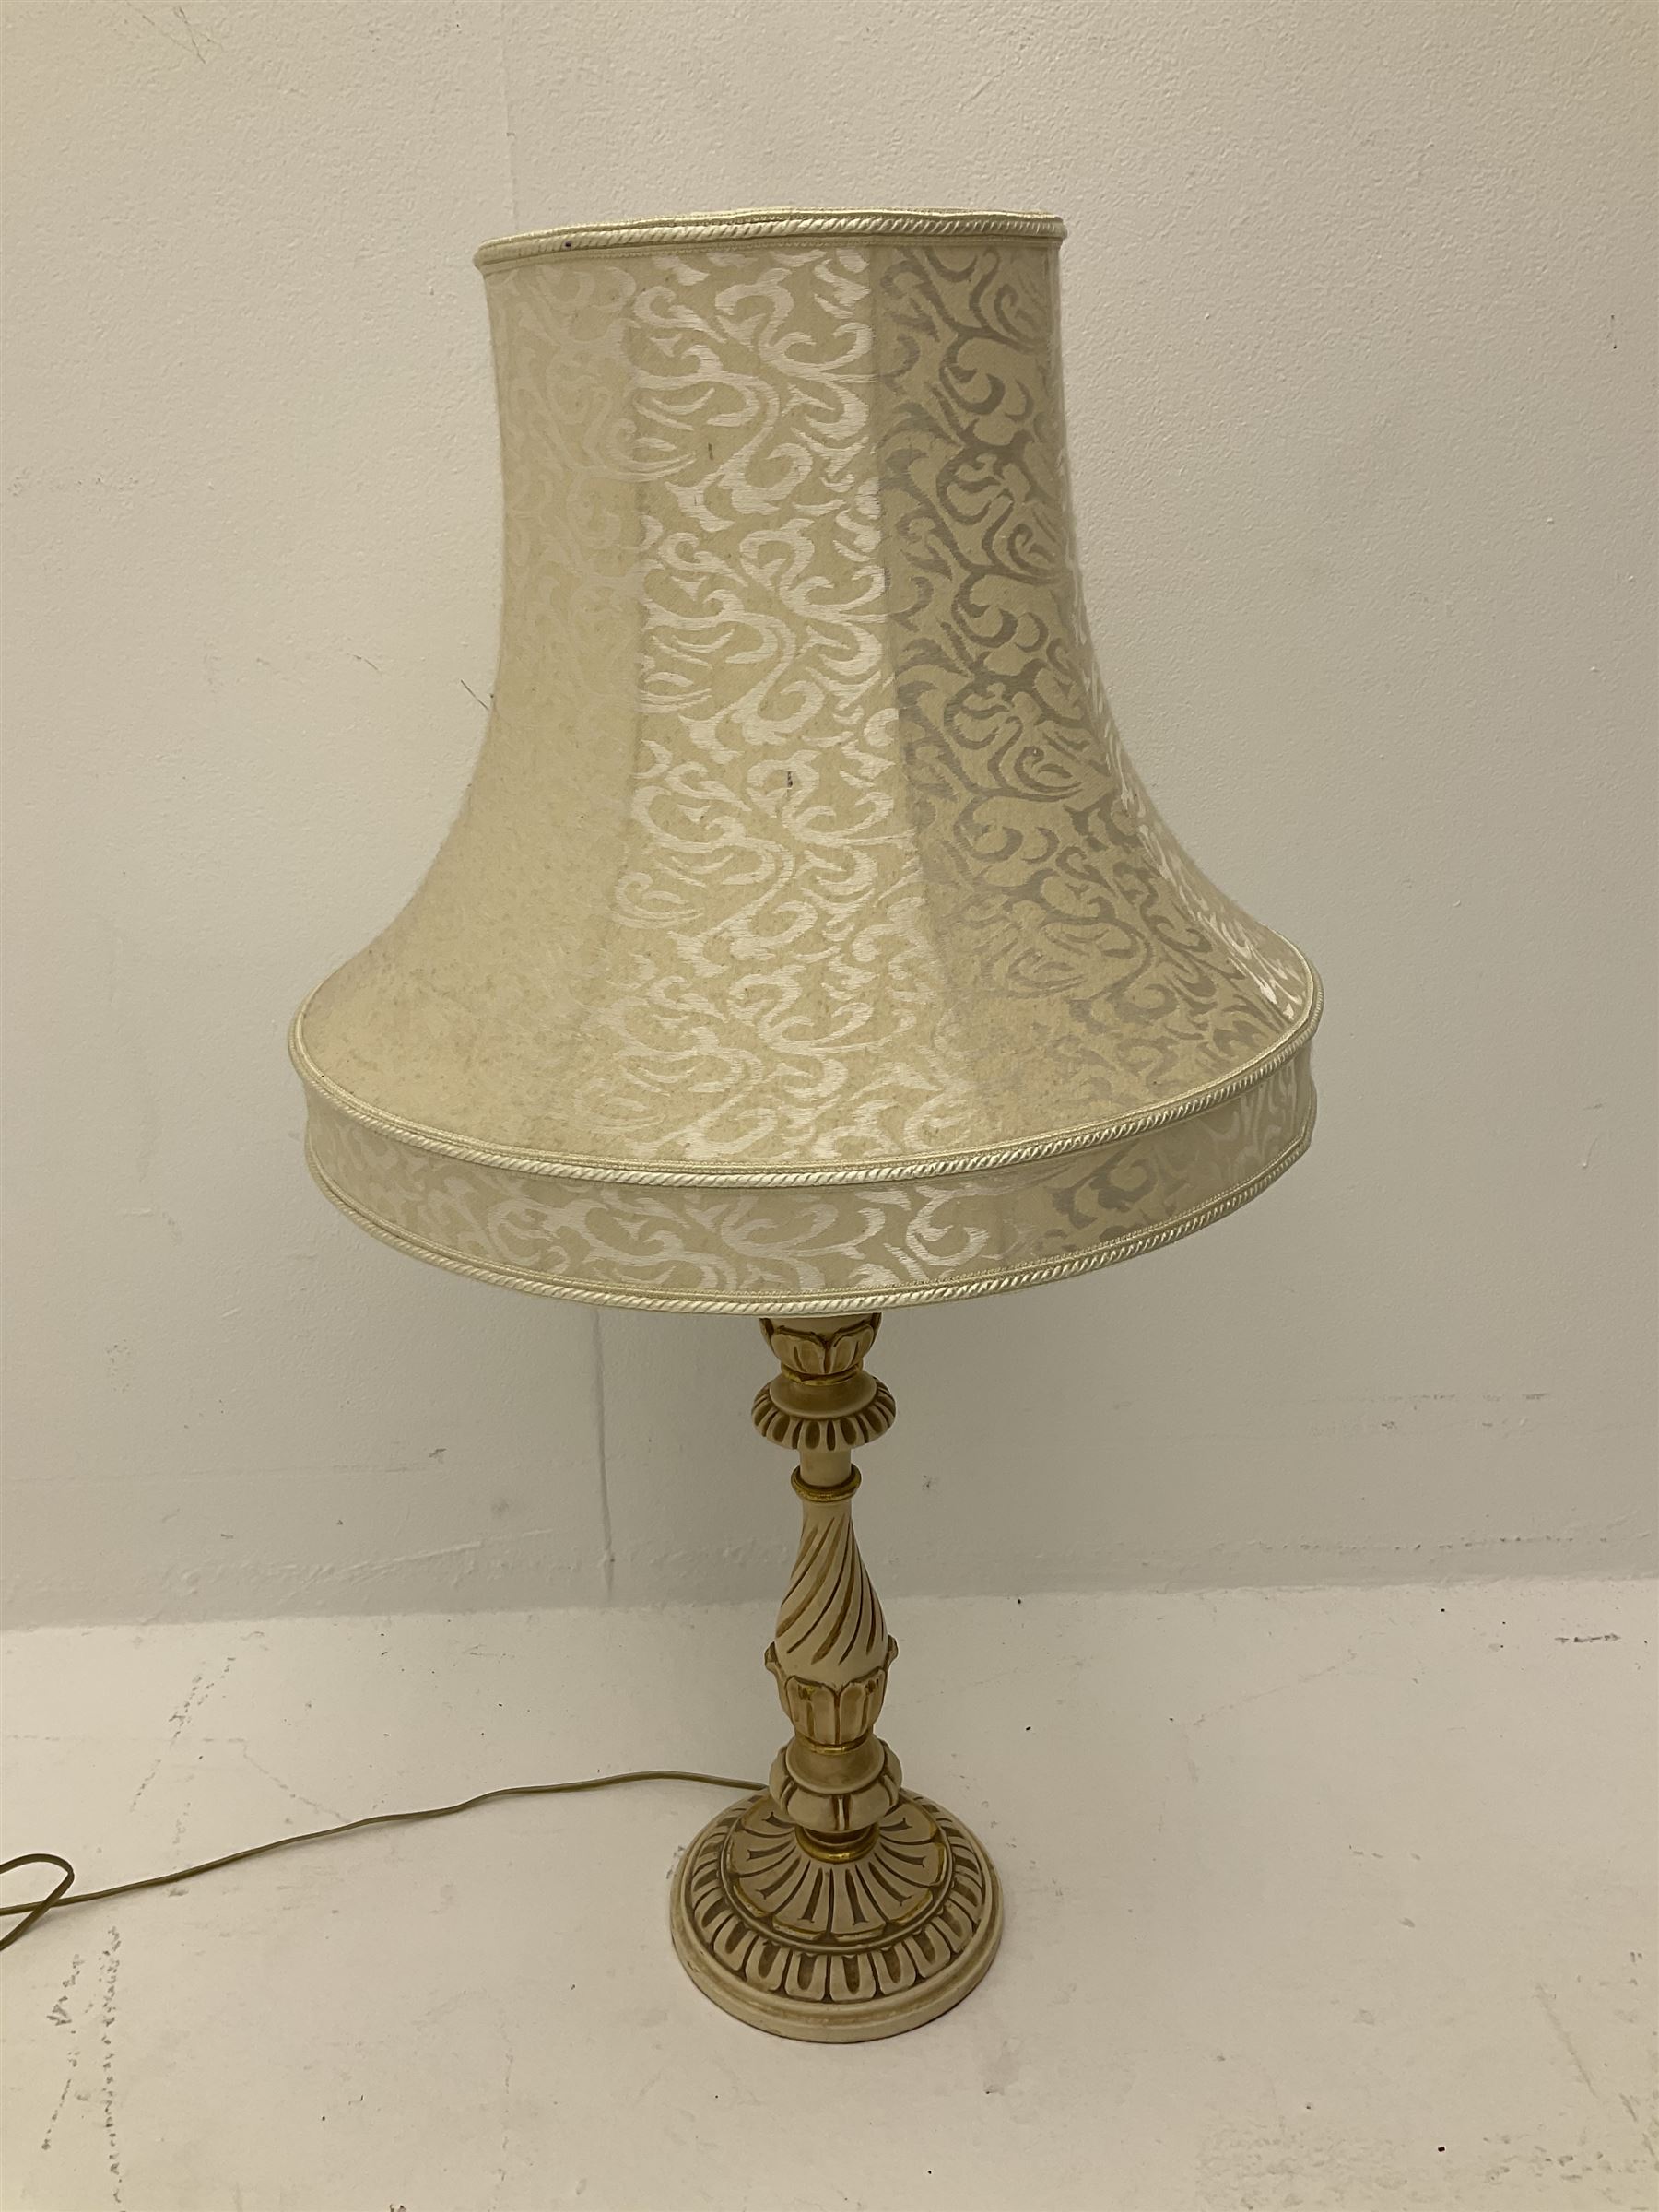 A cream and gilt finished table lamp - Image 2 of 4